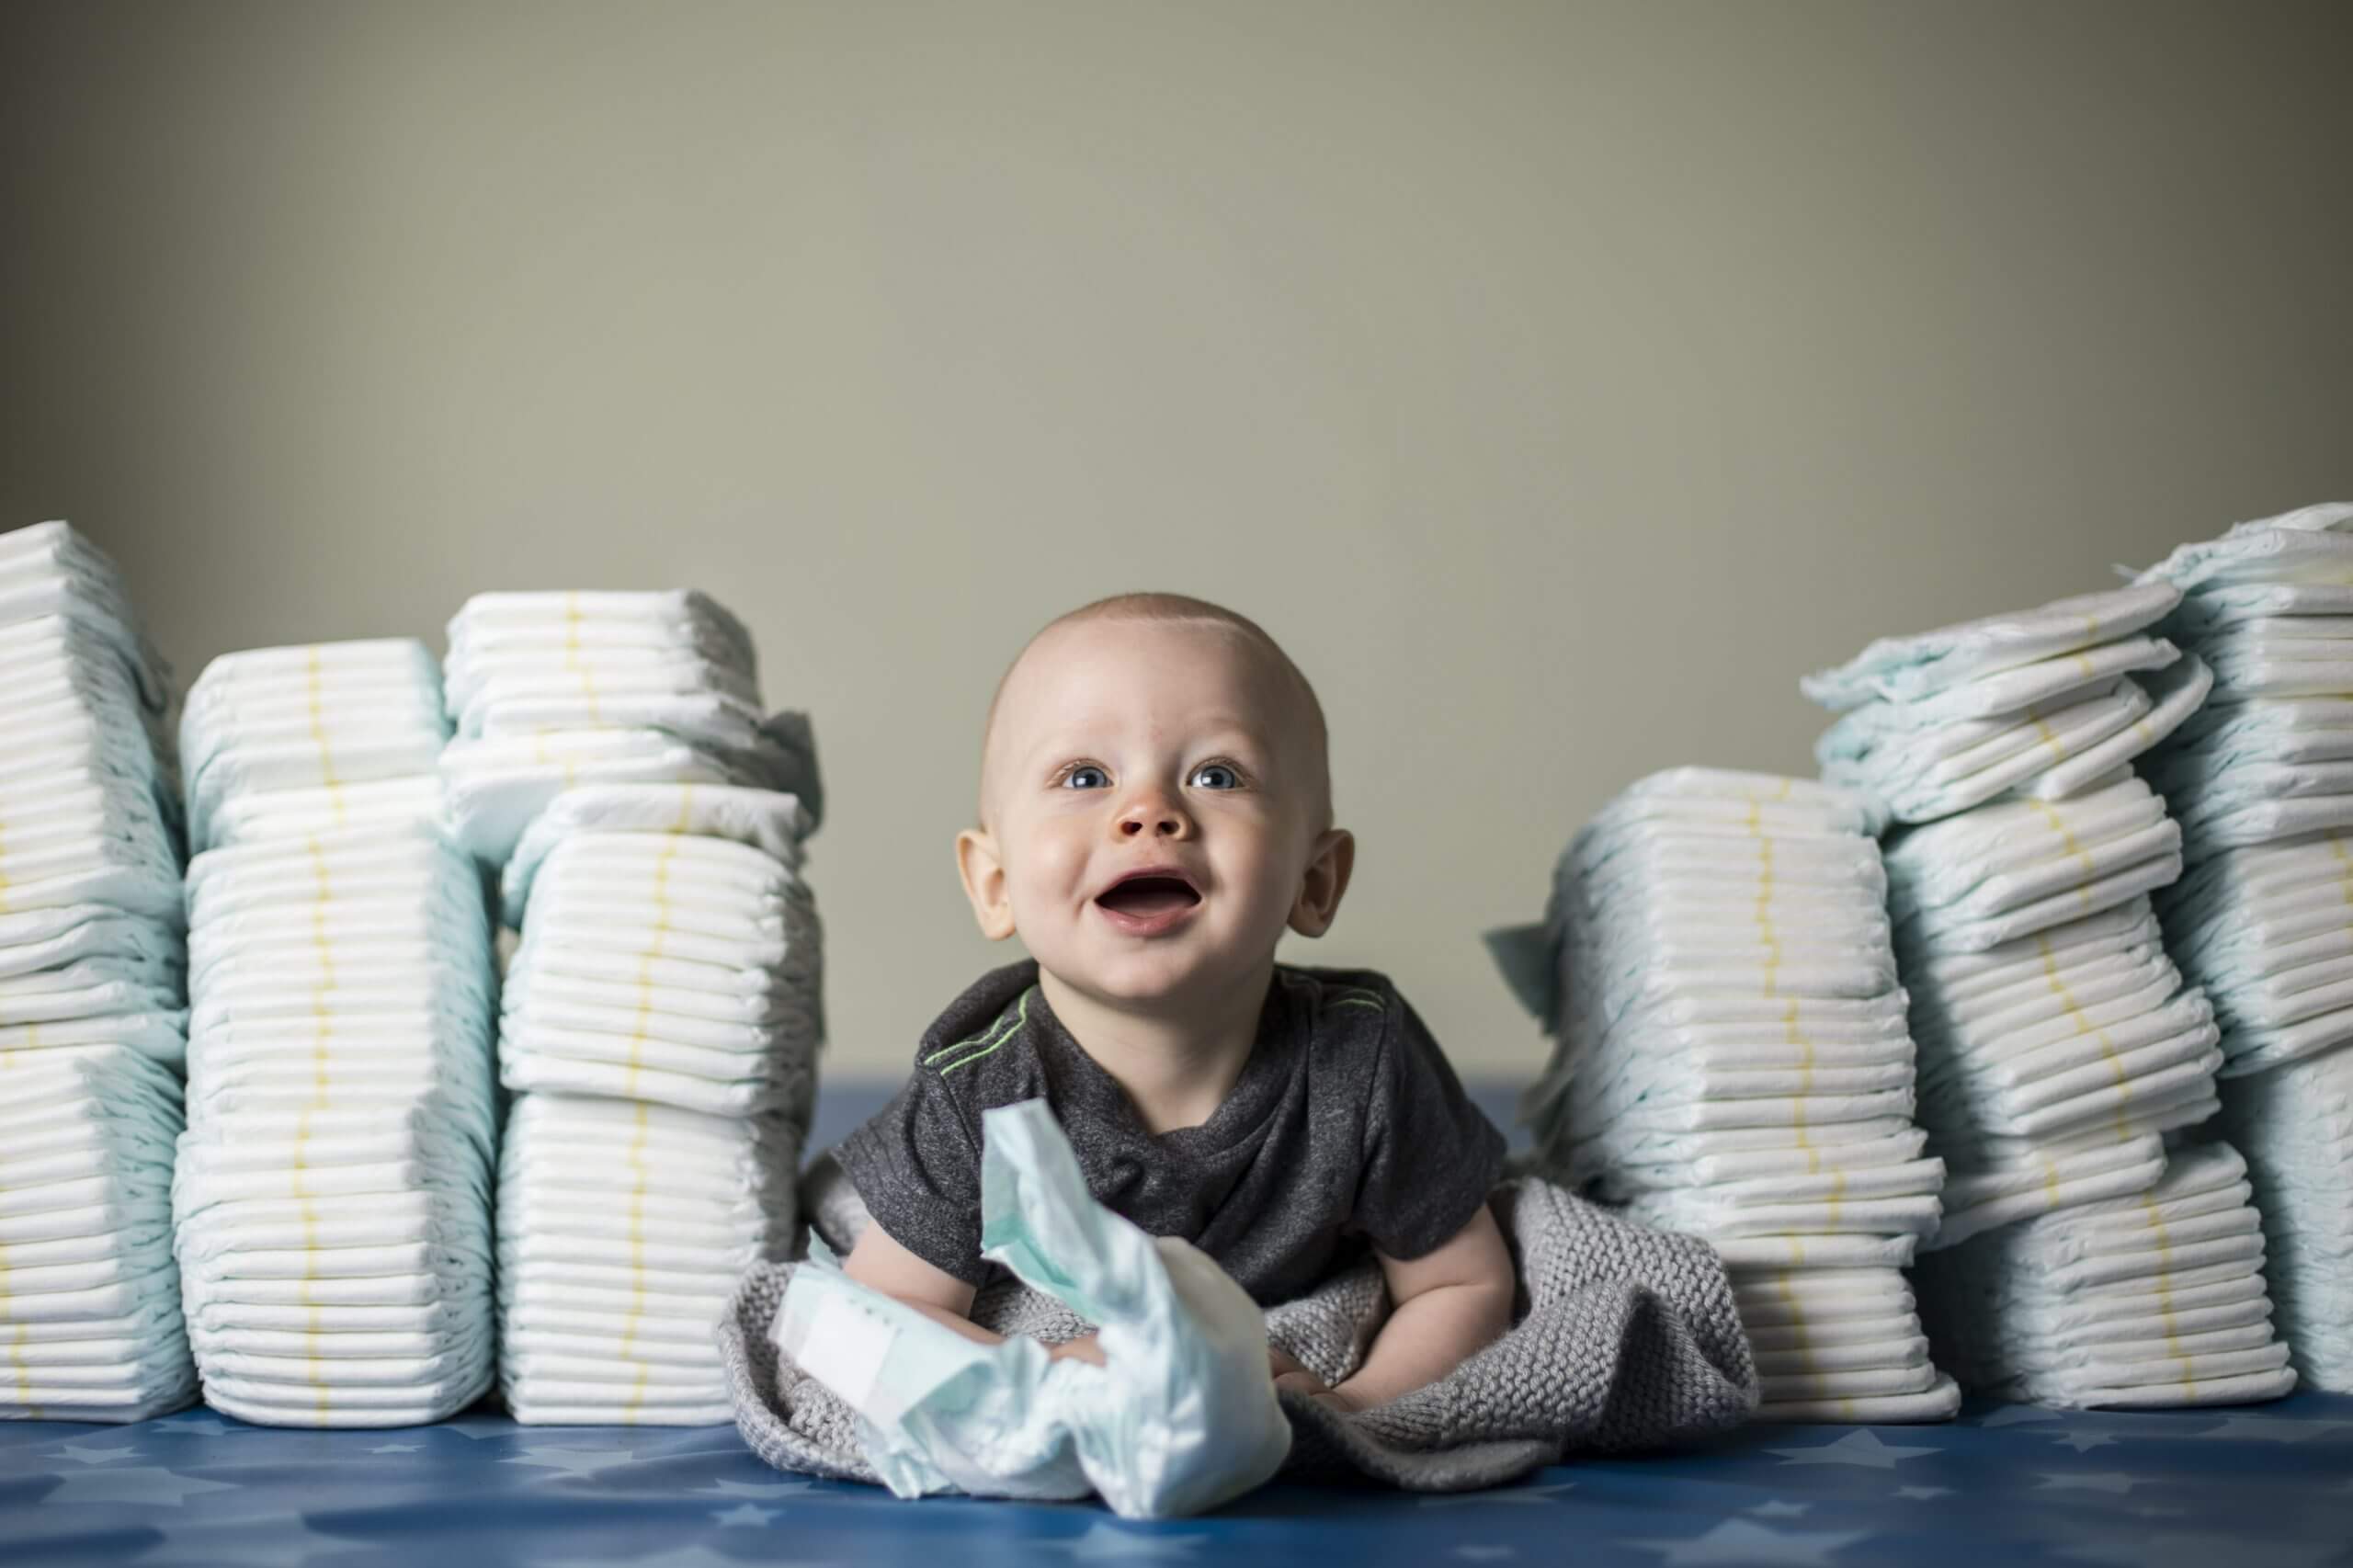 Baby surrounded by stacks of diapers representing how much of a financial responsibility a baby is.